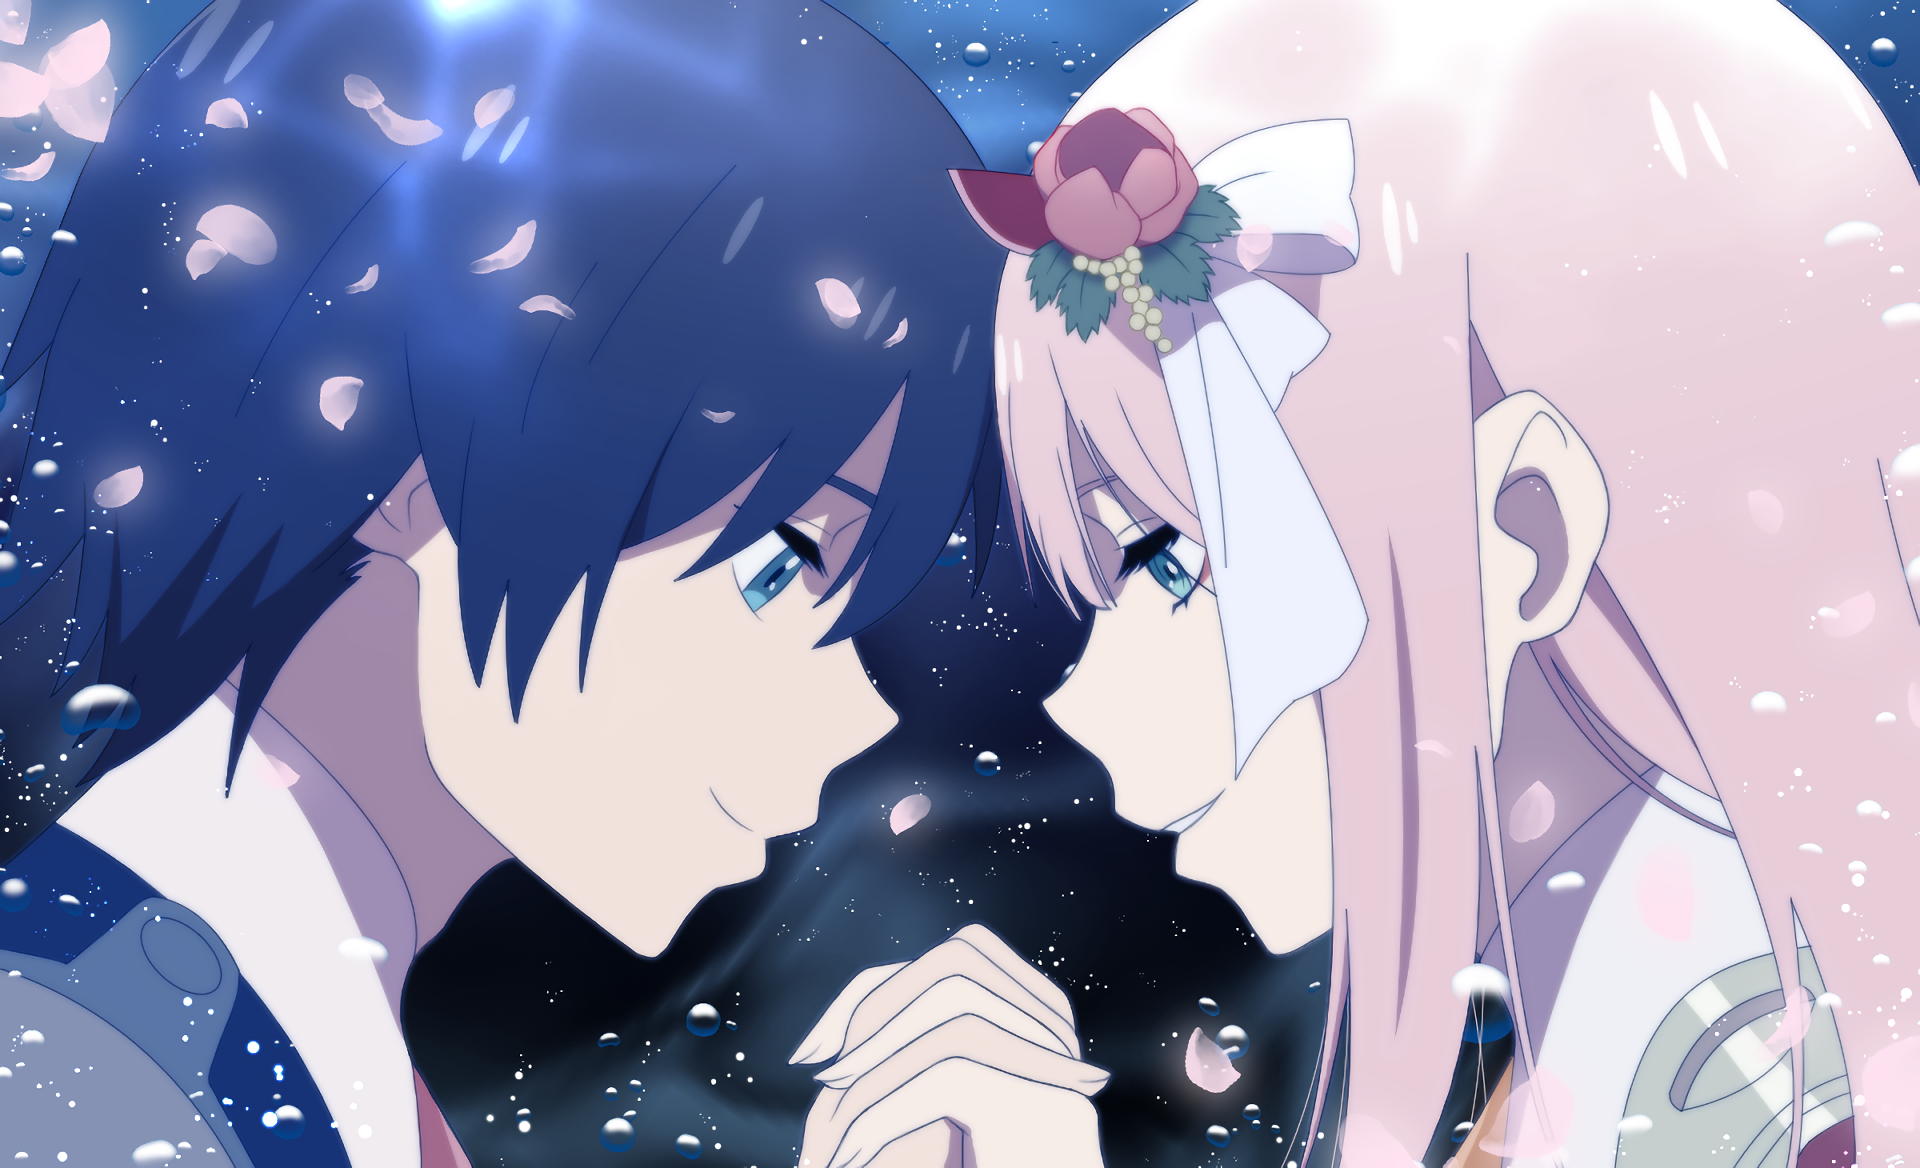 100+] Darling In The Franxx Wallpapers